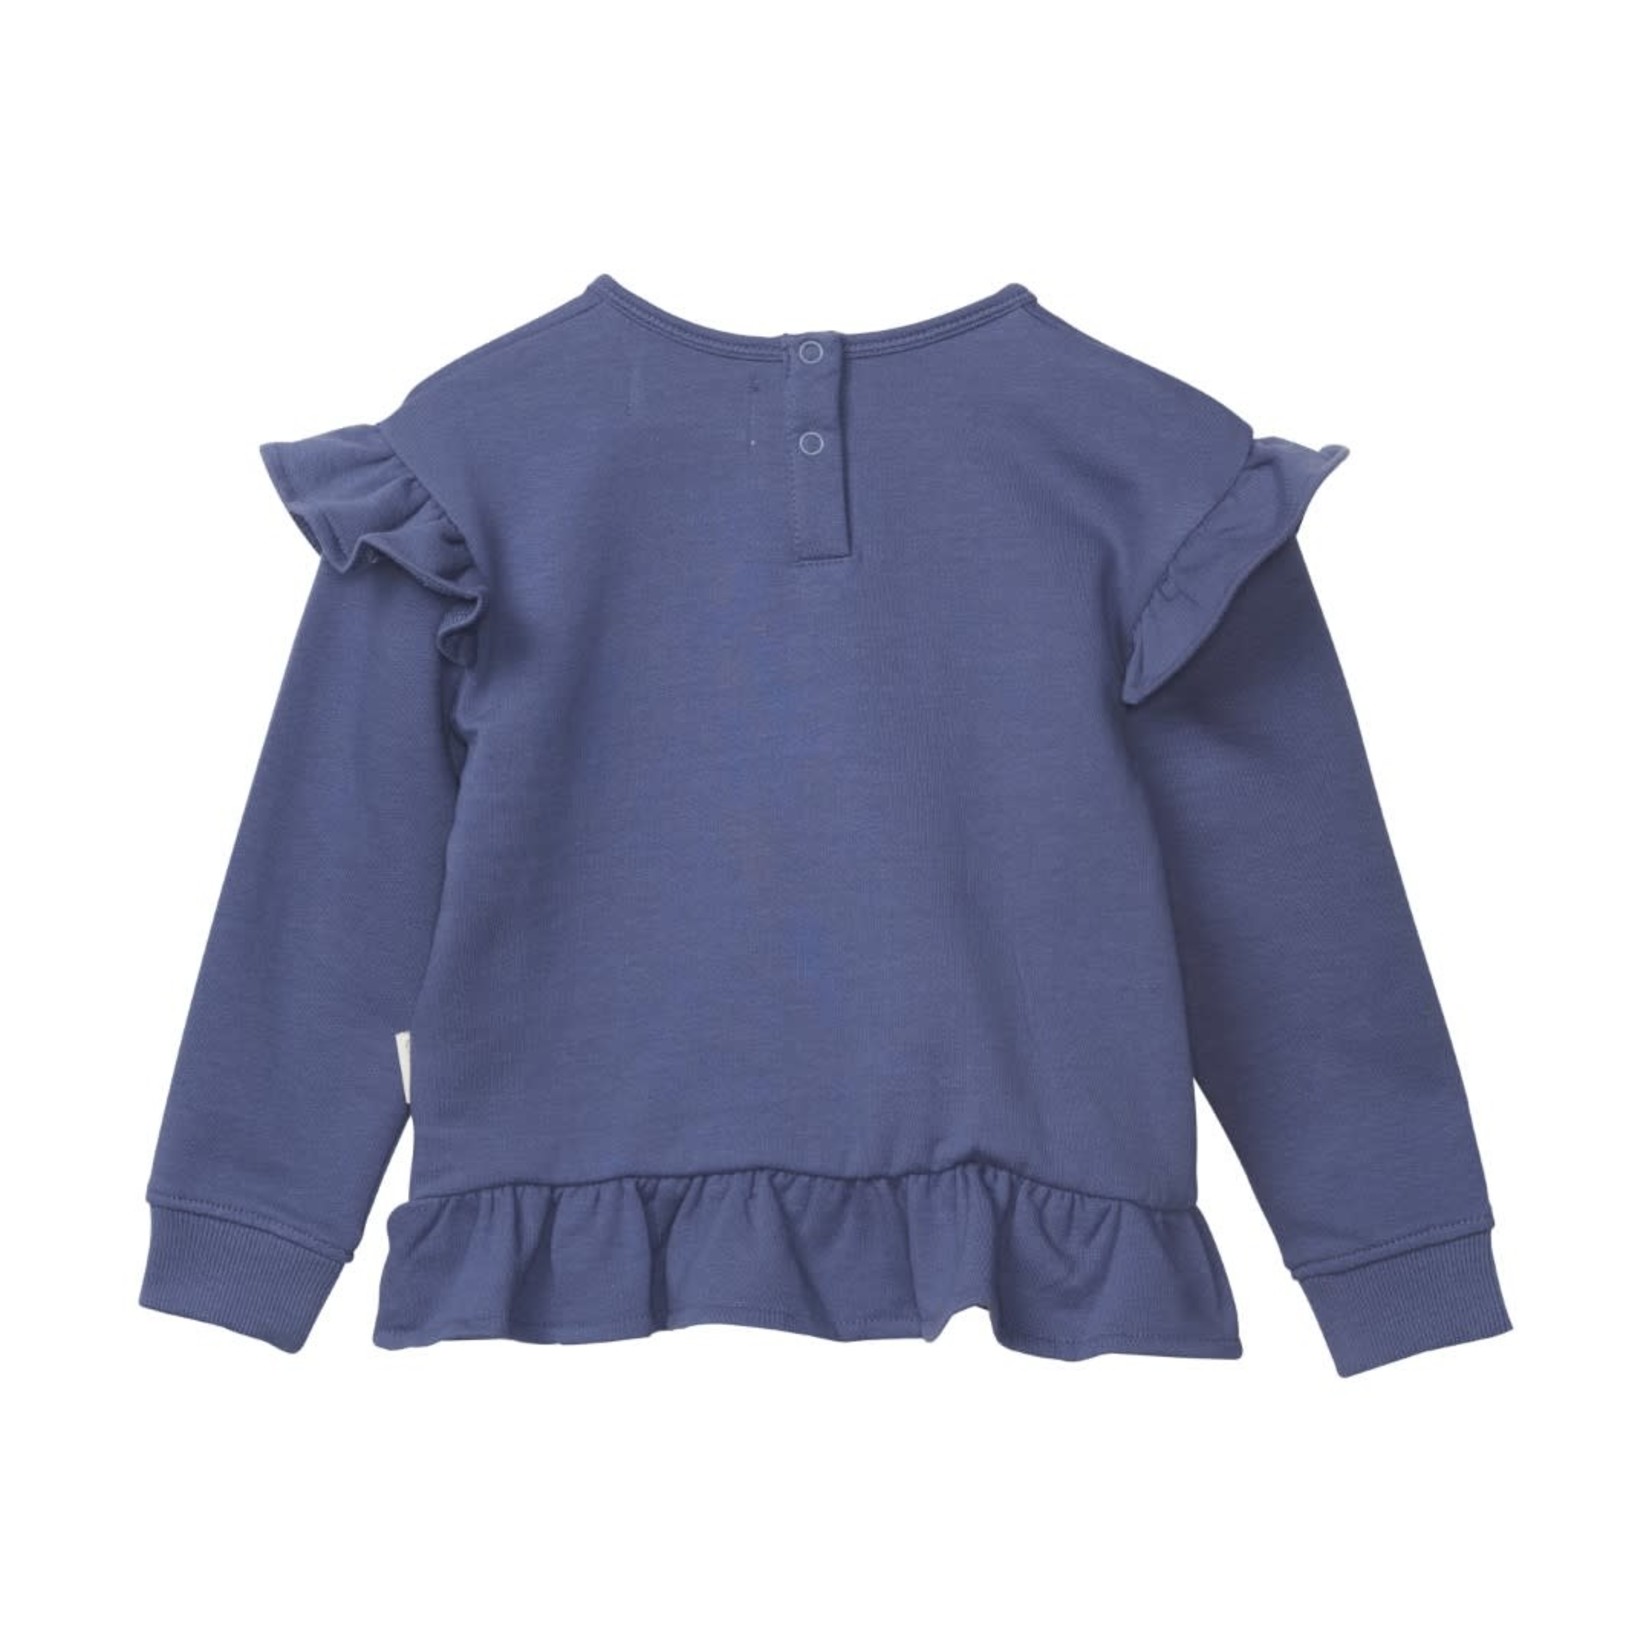 Creamie CREAMIE - Blue Ruffle Sweatshirt with 'Love' Butterfly Embroidery